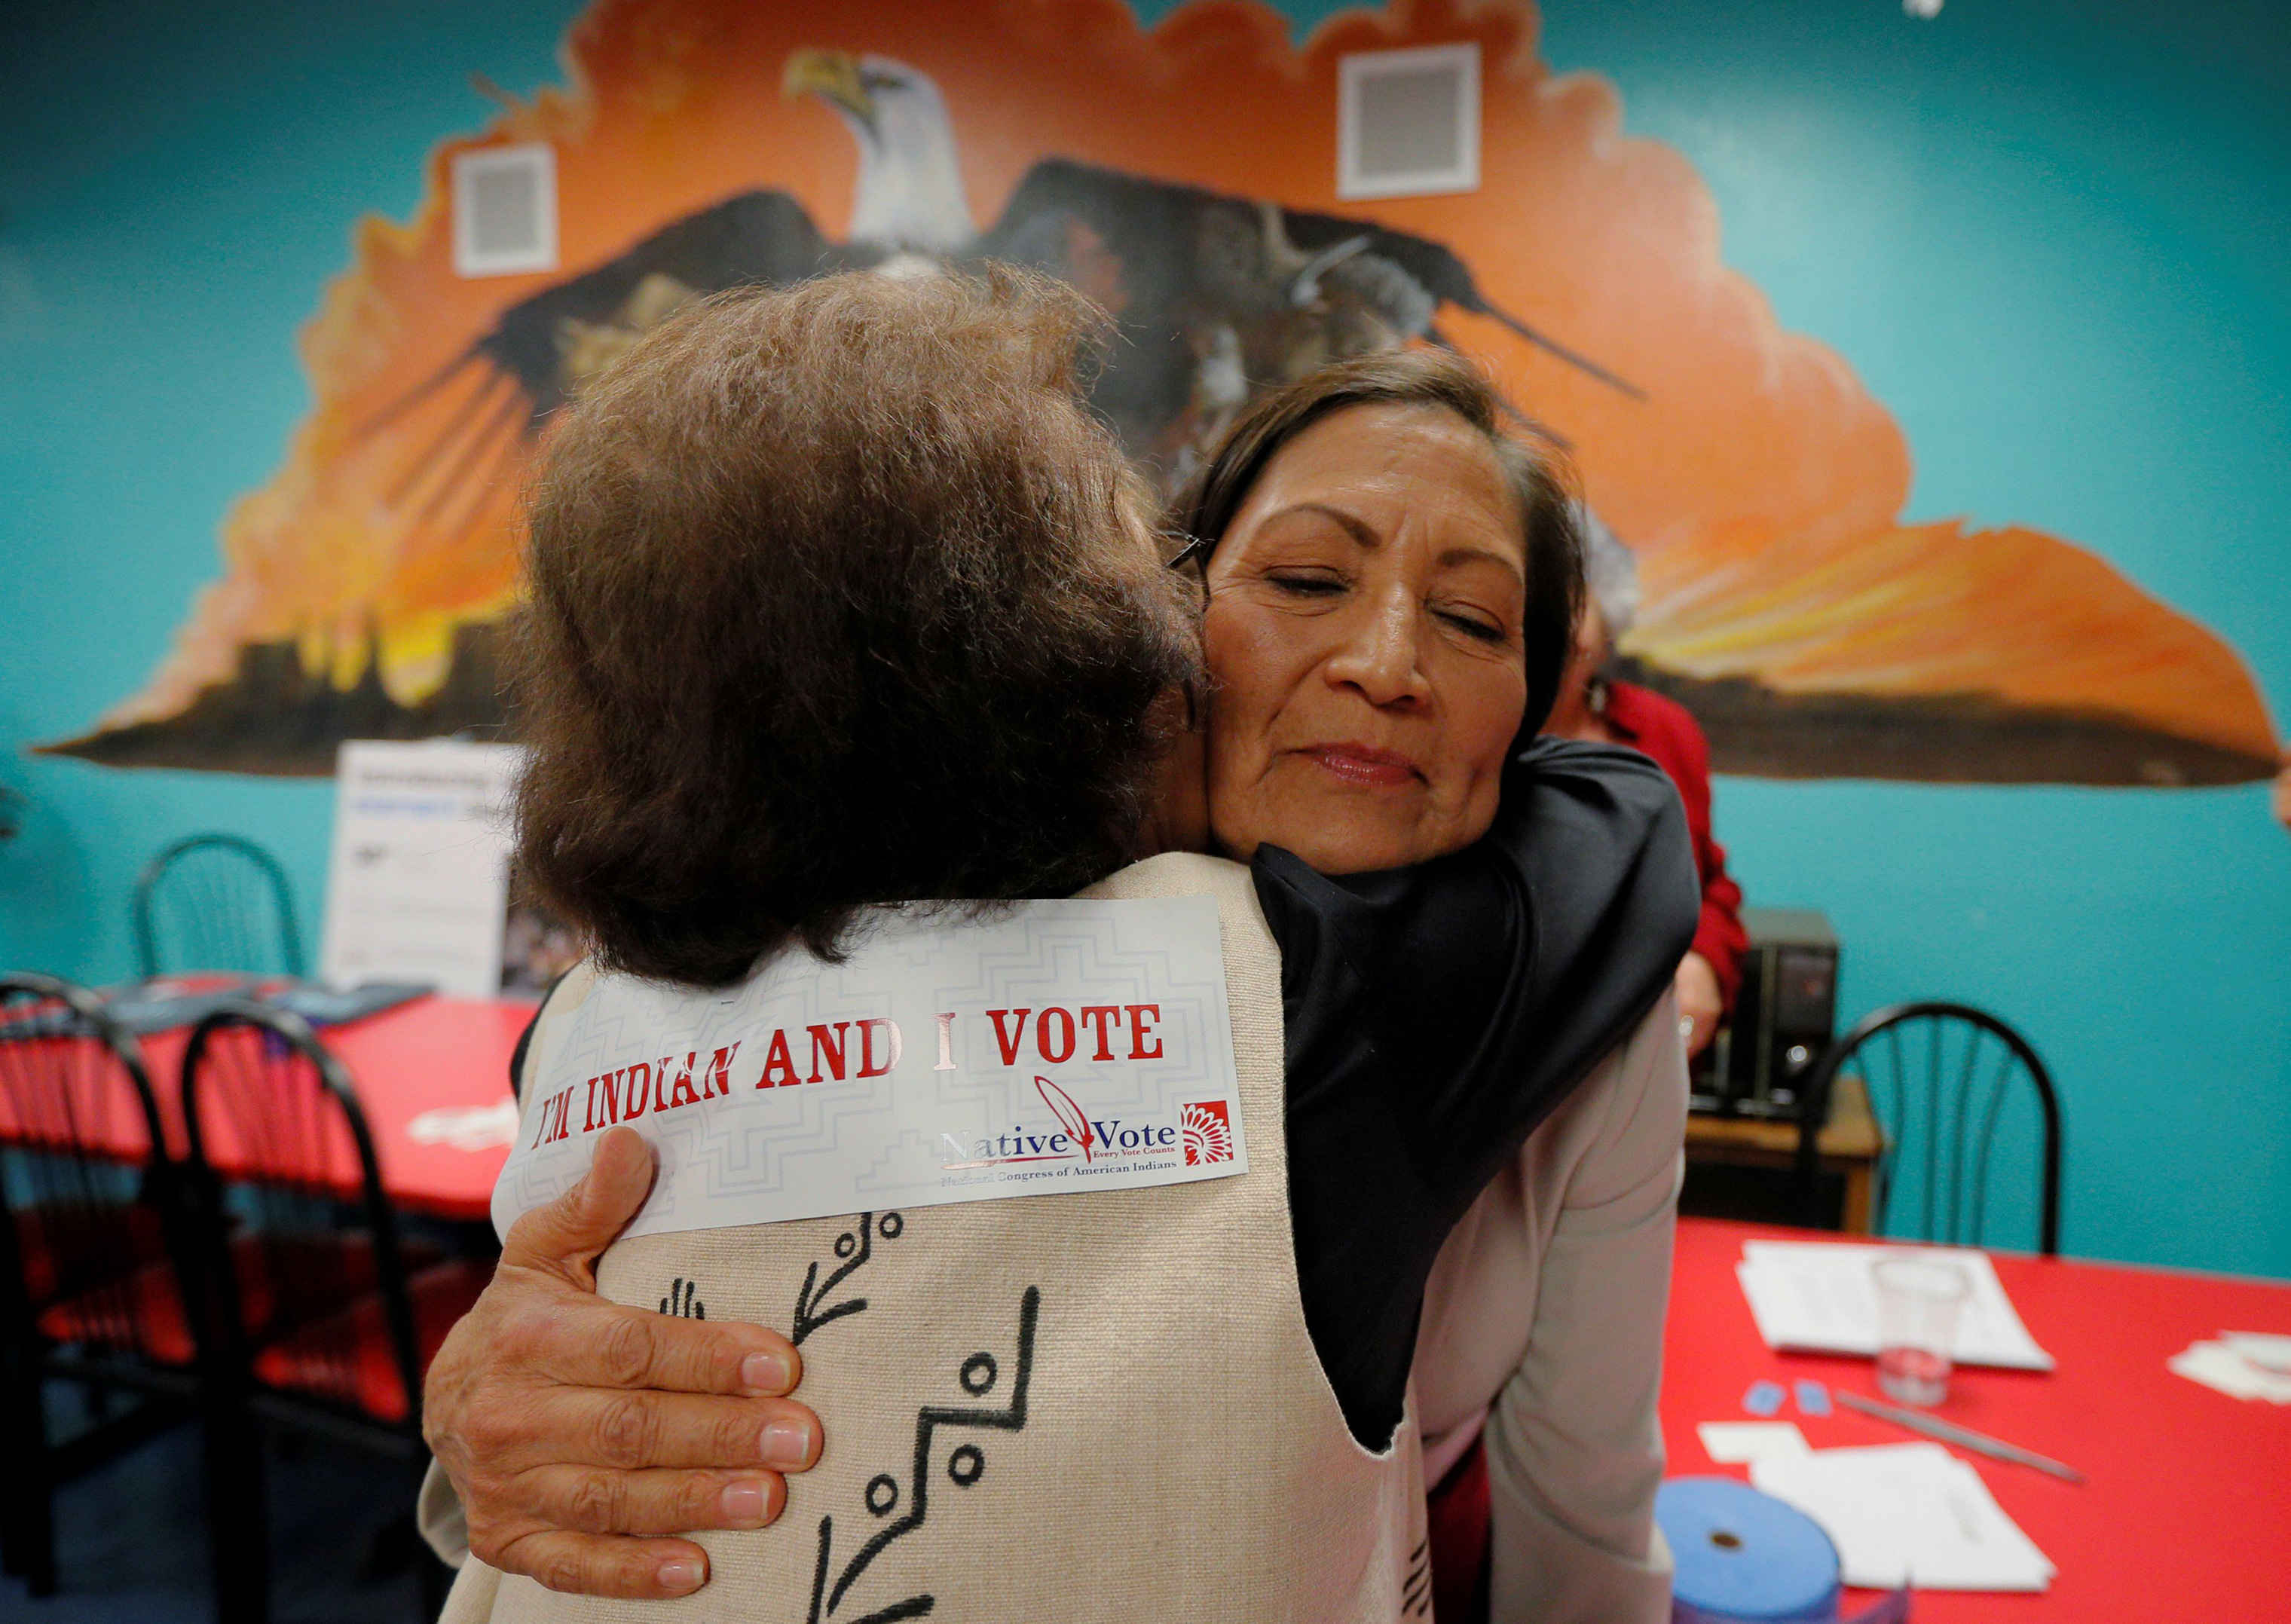 U.S. Democratic Congressional candidate Deb Haaland, who is trying to become the first Native American woman in the U.S. House of Representatives, hugs Dottie Tiger at a Native Vote Celebration on Election Night in Albuquerque, N.M. (Brian Snyder—Reuters)